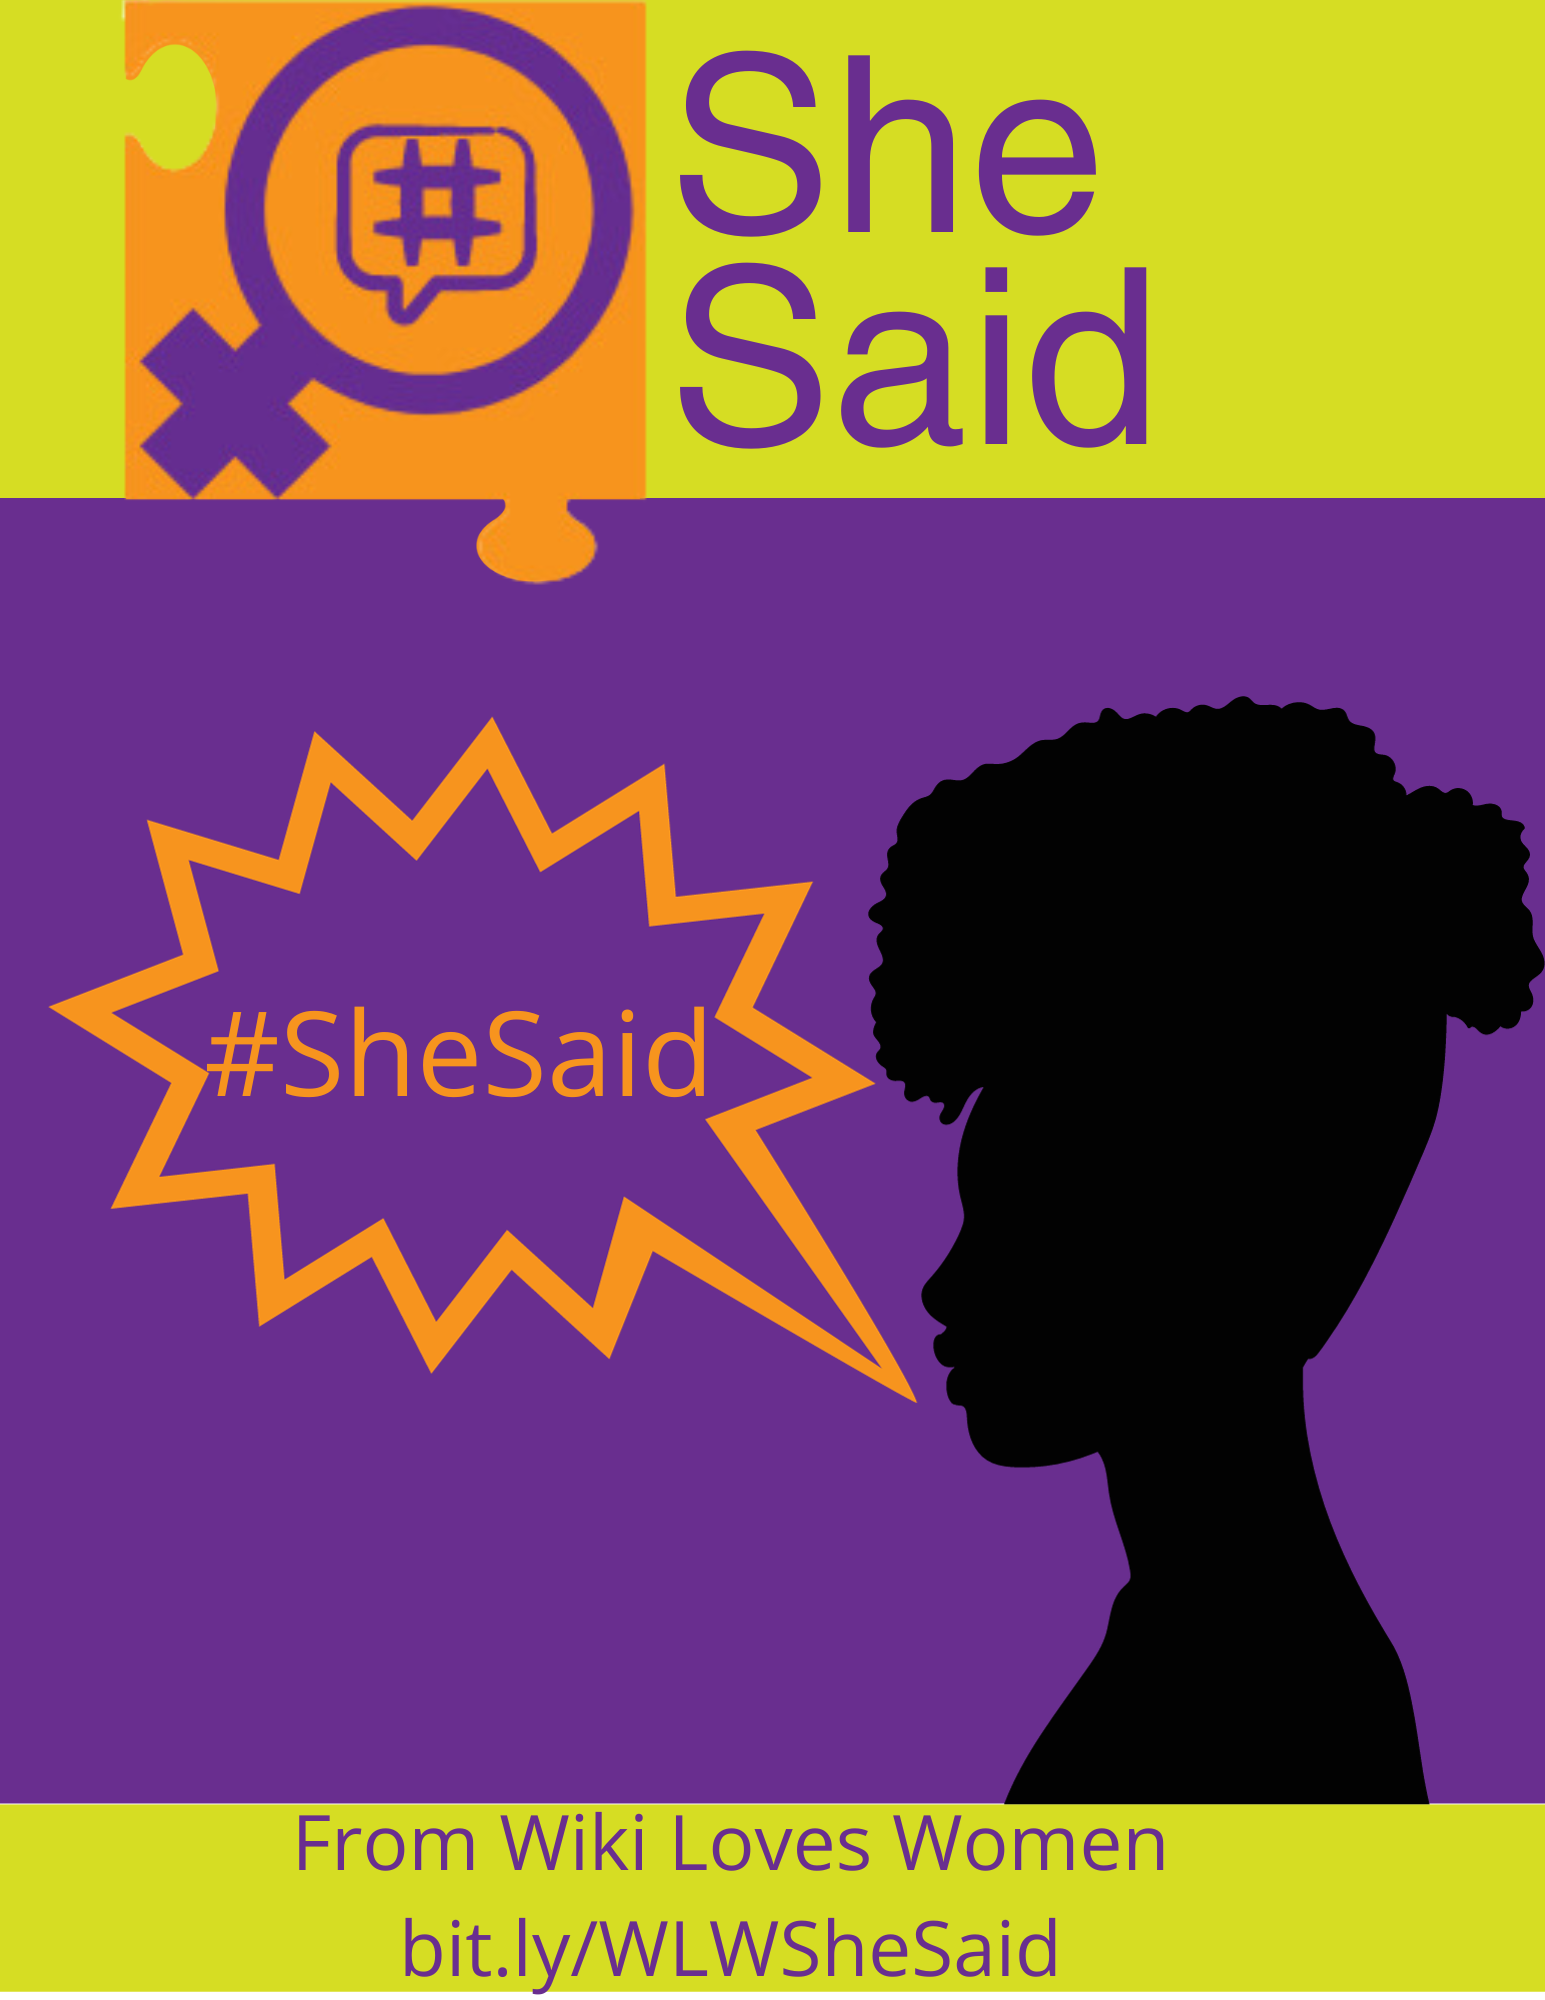 Silhouette of woman saying the words, "She Said". Subtitle text says, "From Wiki Loves Women bit.ly/WLWSheSaid"